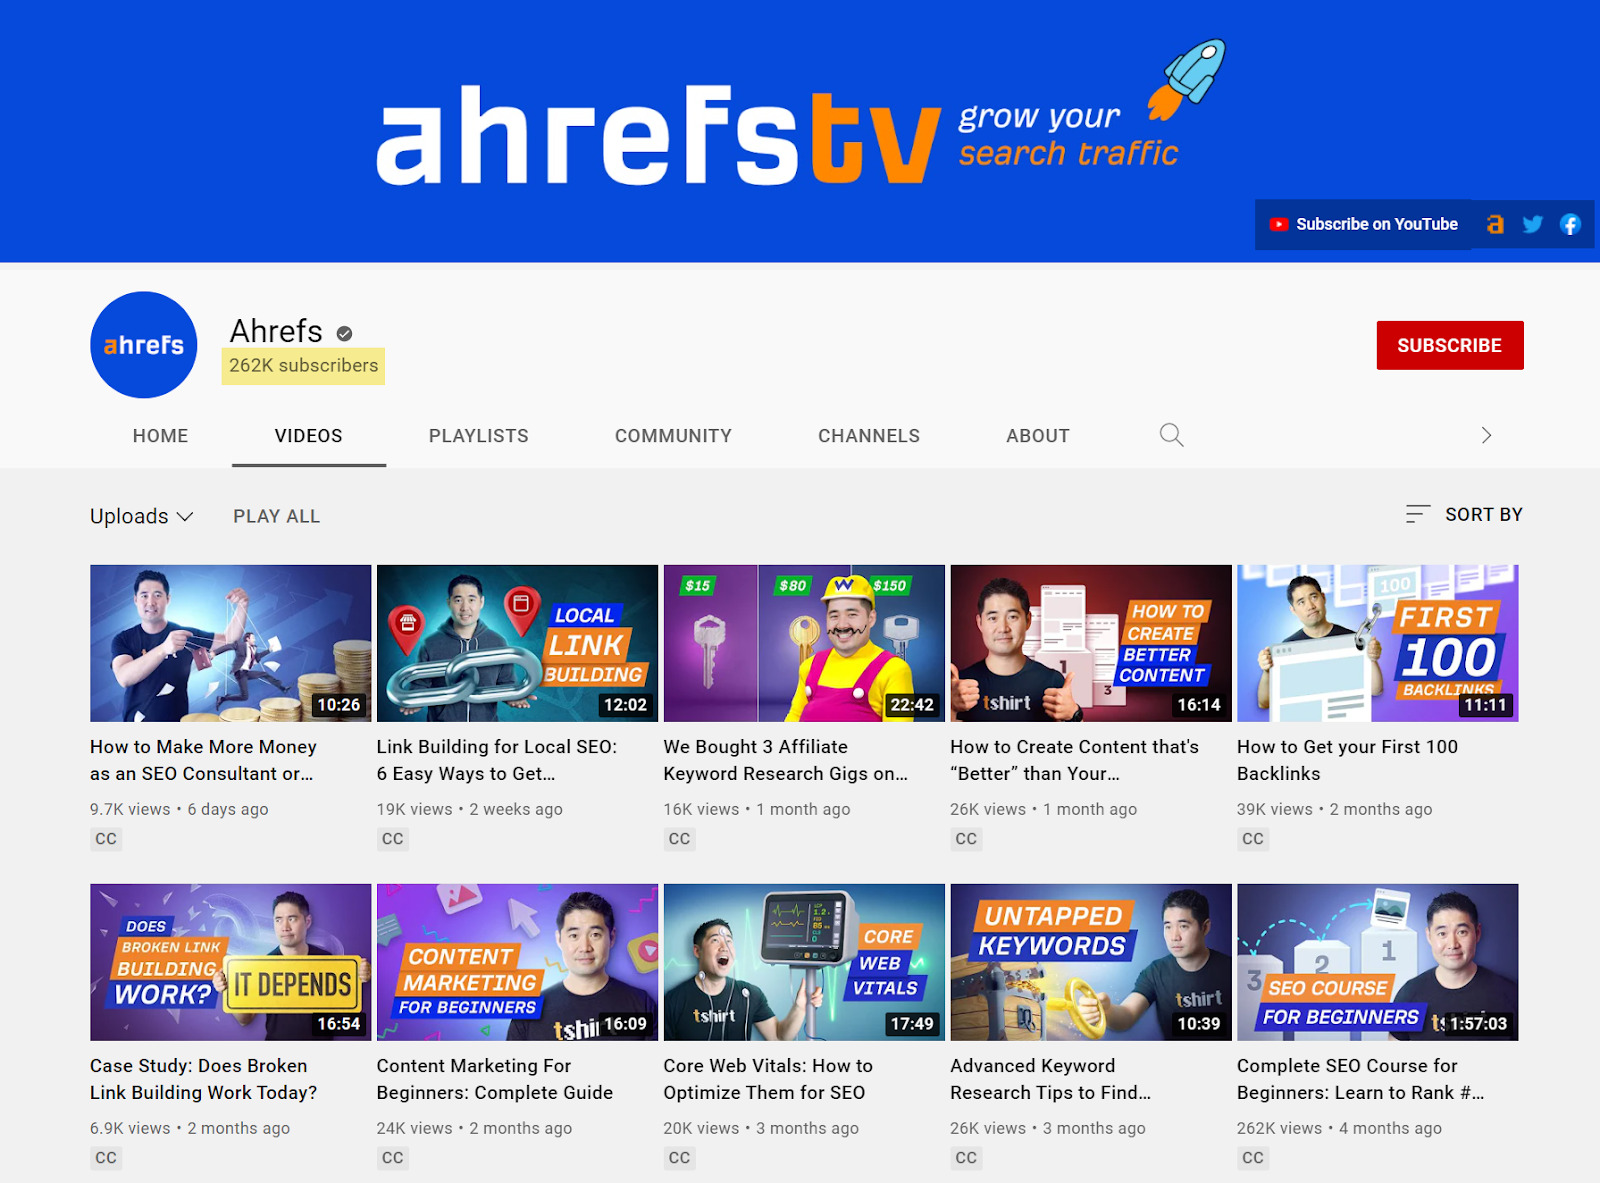 Overview of videos on Ahrefs' Youtube channel